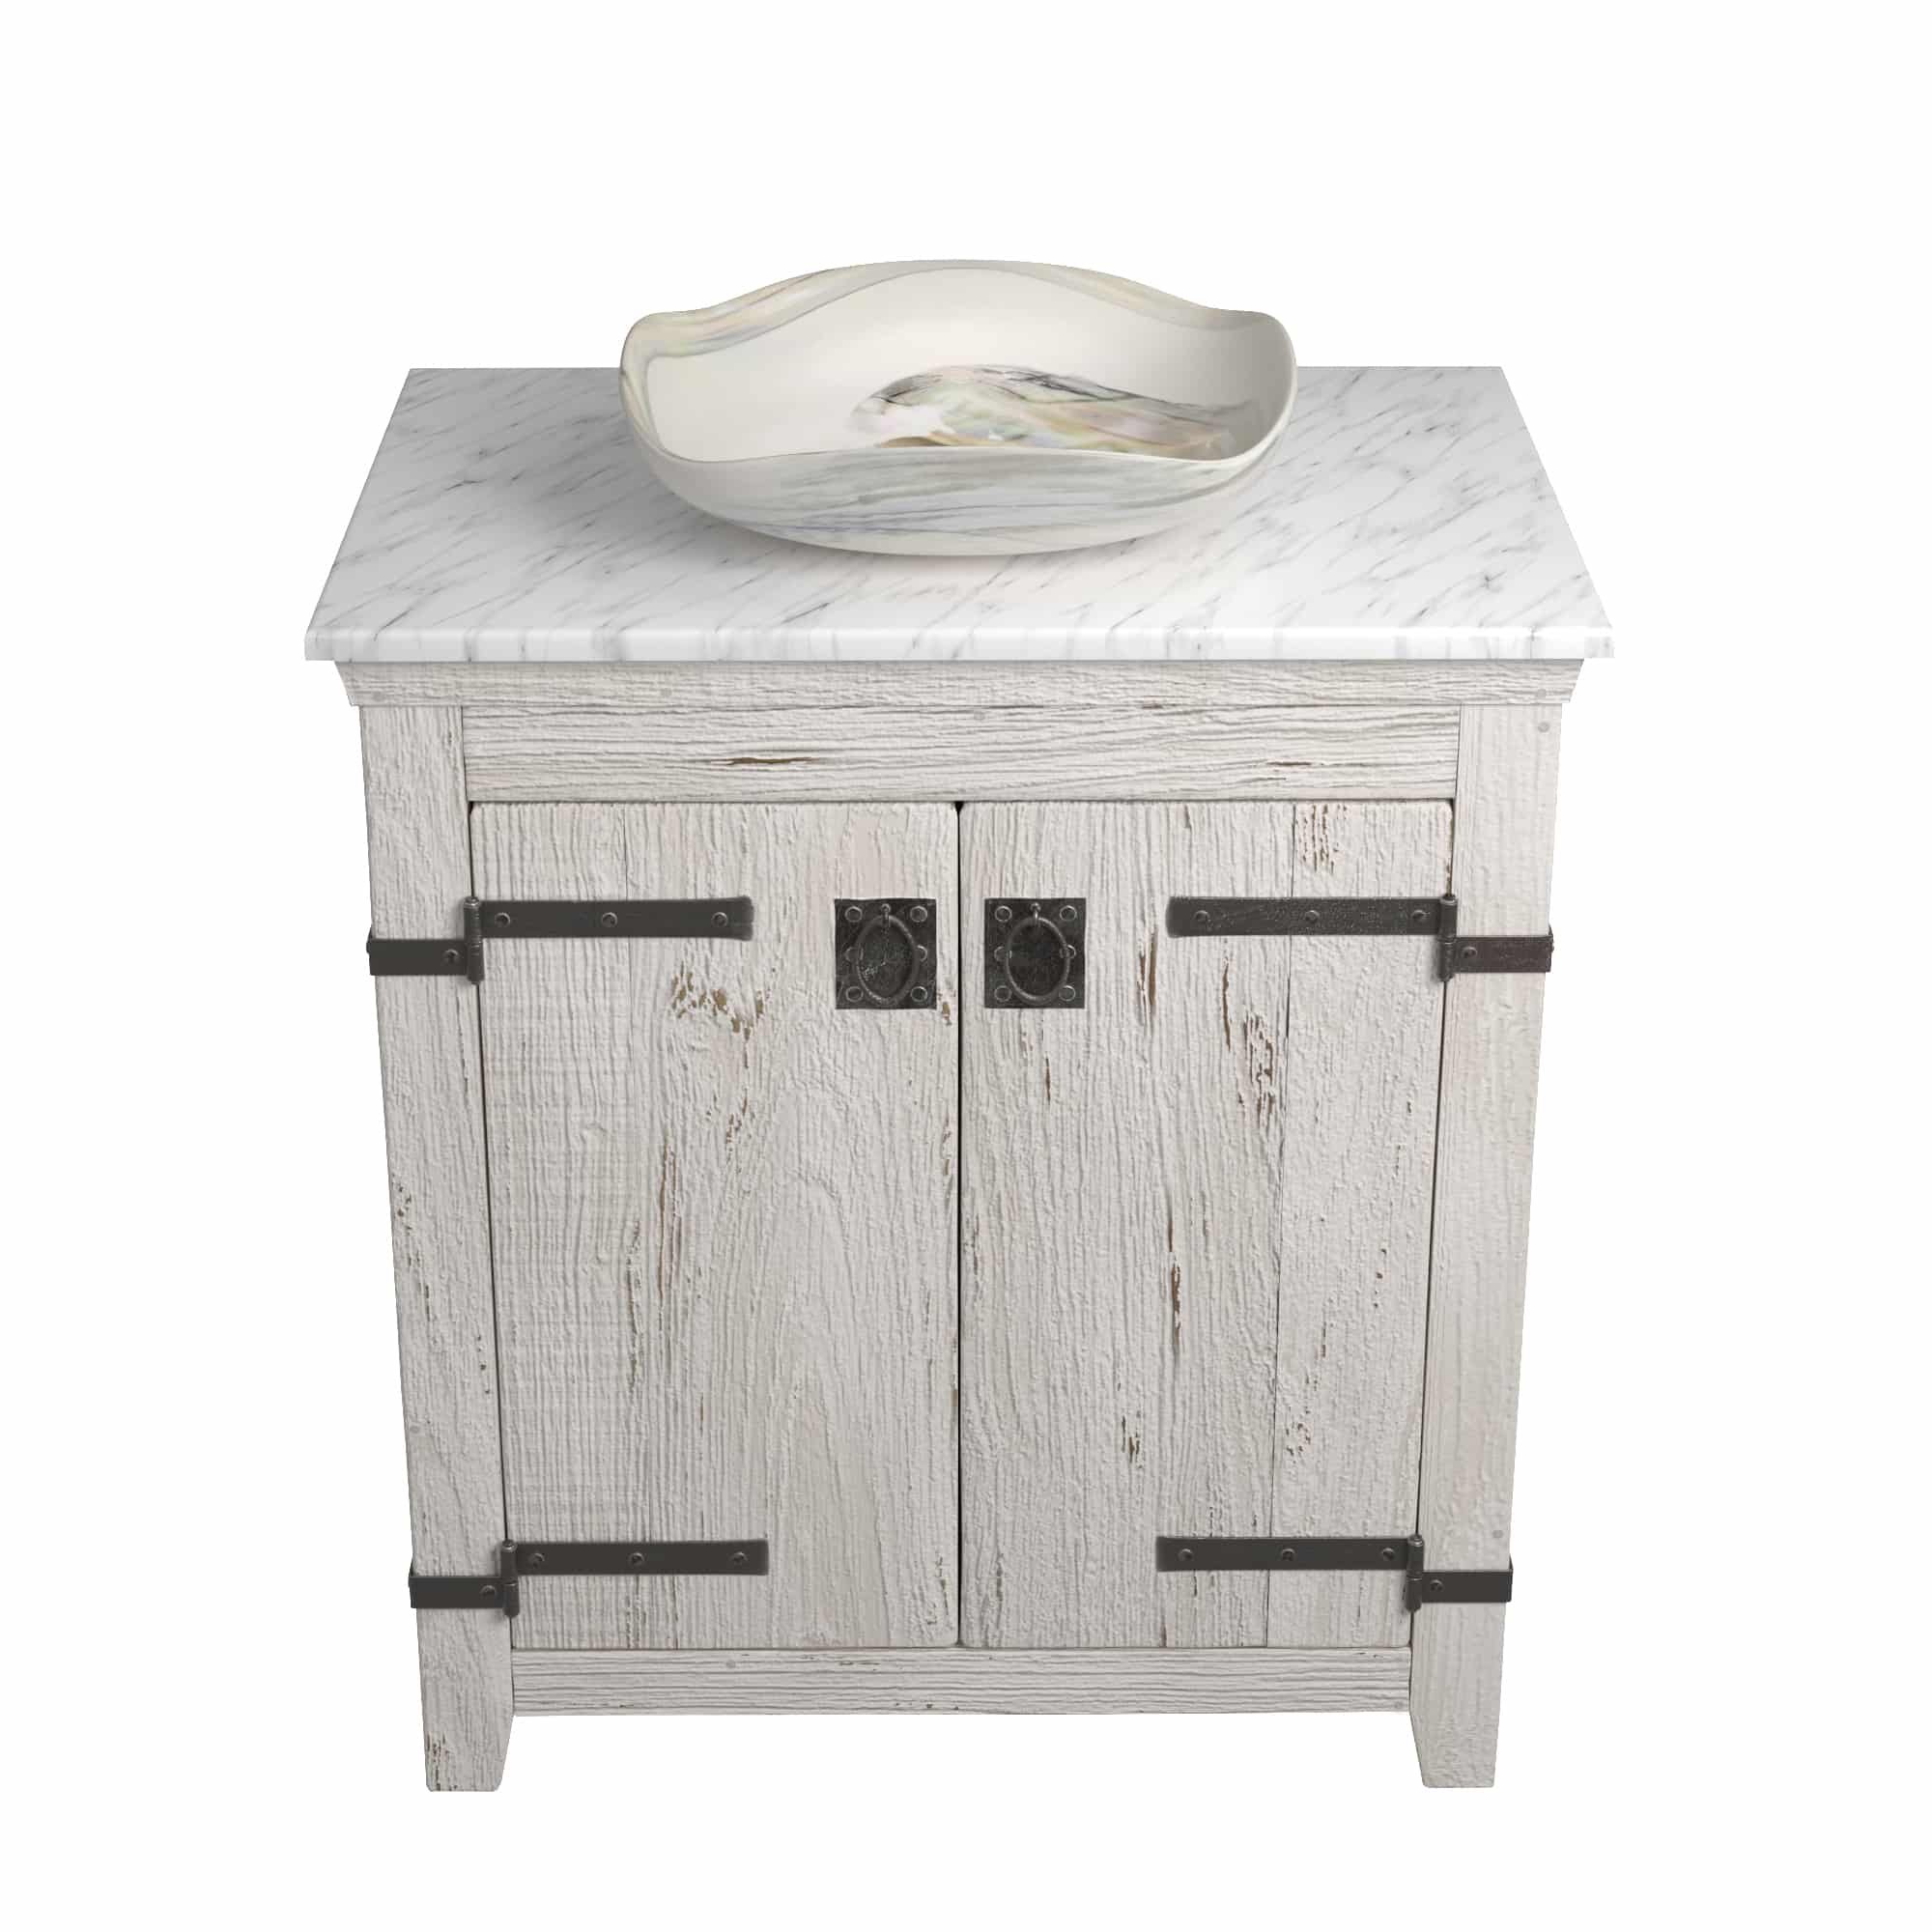 Native Trails 30" Americana Vanity in Whitewash with Carrara Marble Top and Lido in Abalone, Single Faucet Hole, BND30-VB-CT-MG-001